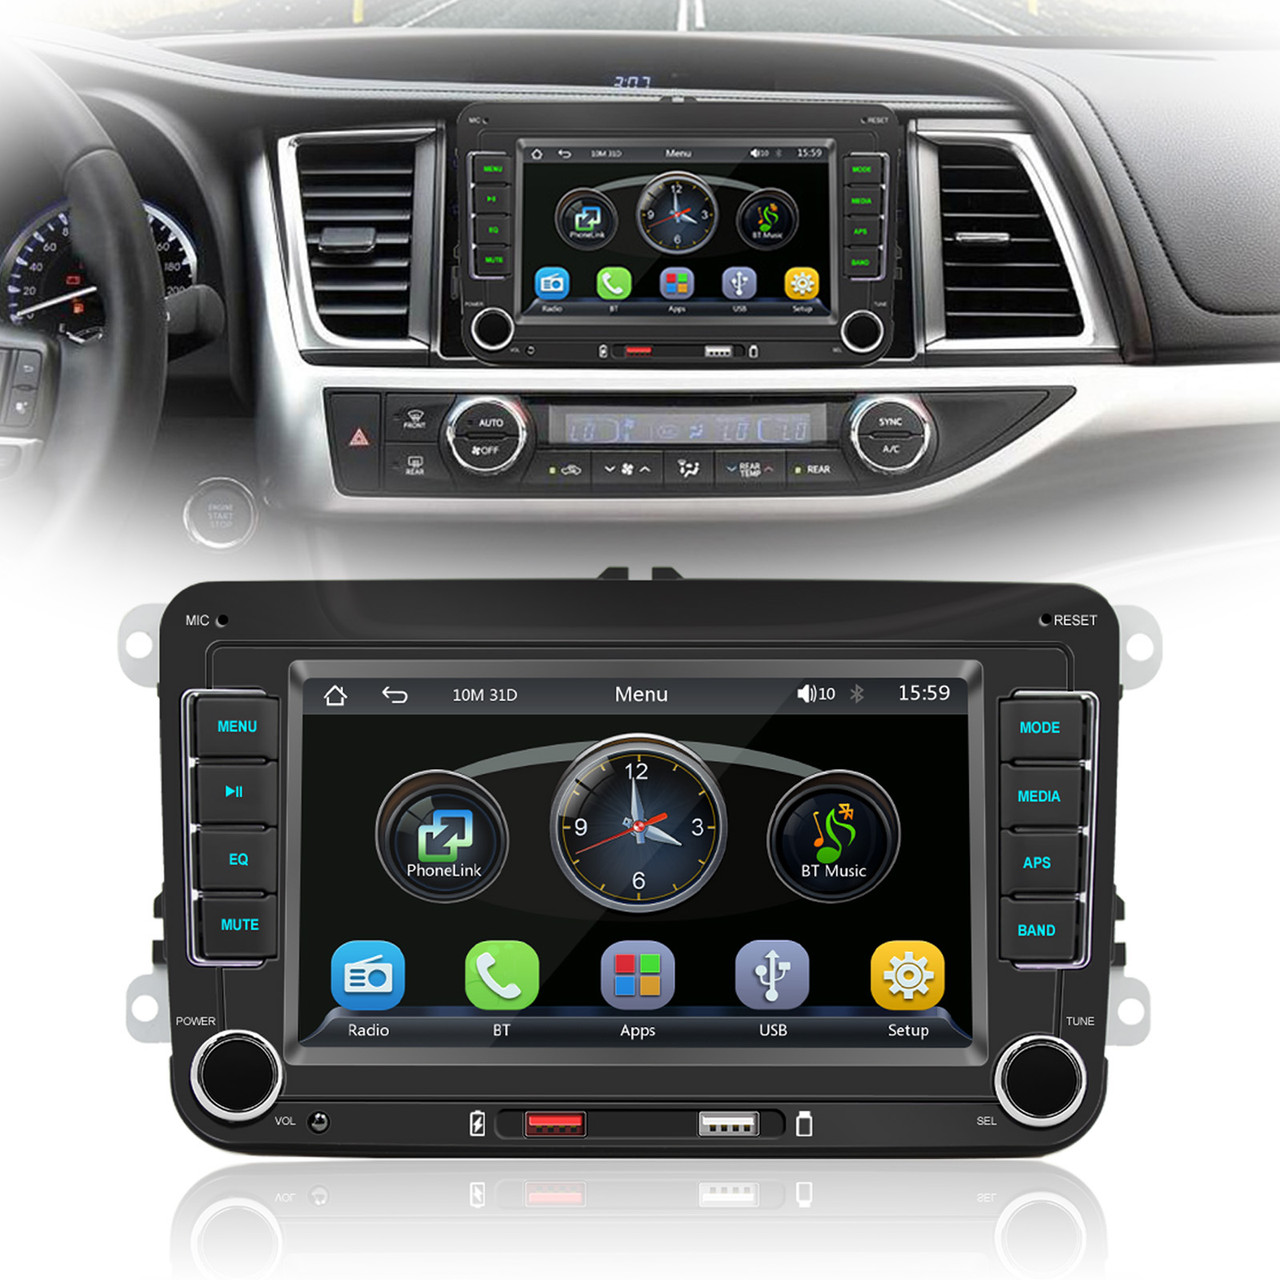 7" Wireless Carplay Bluetooth Stereo Radio FM Car MP5 Player For Volkswagen Cars